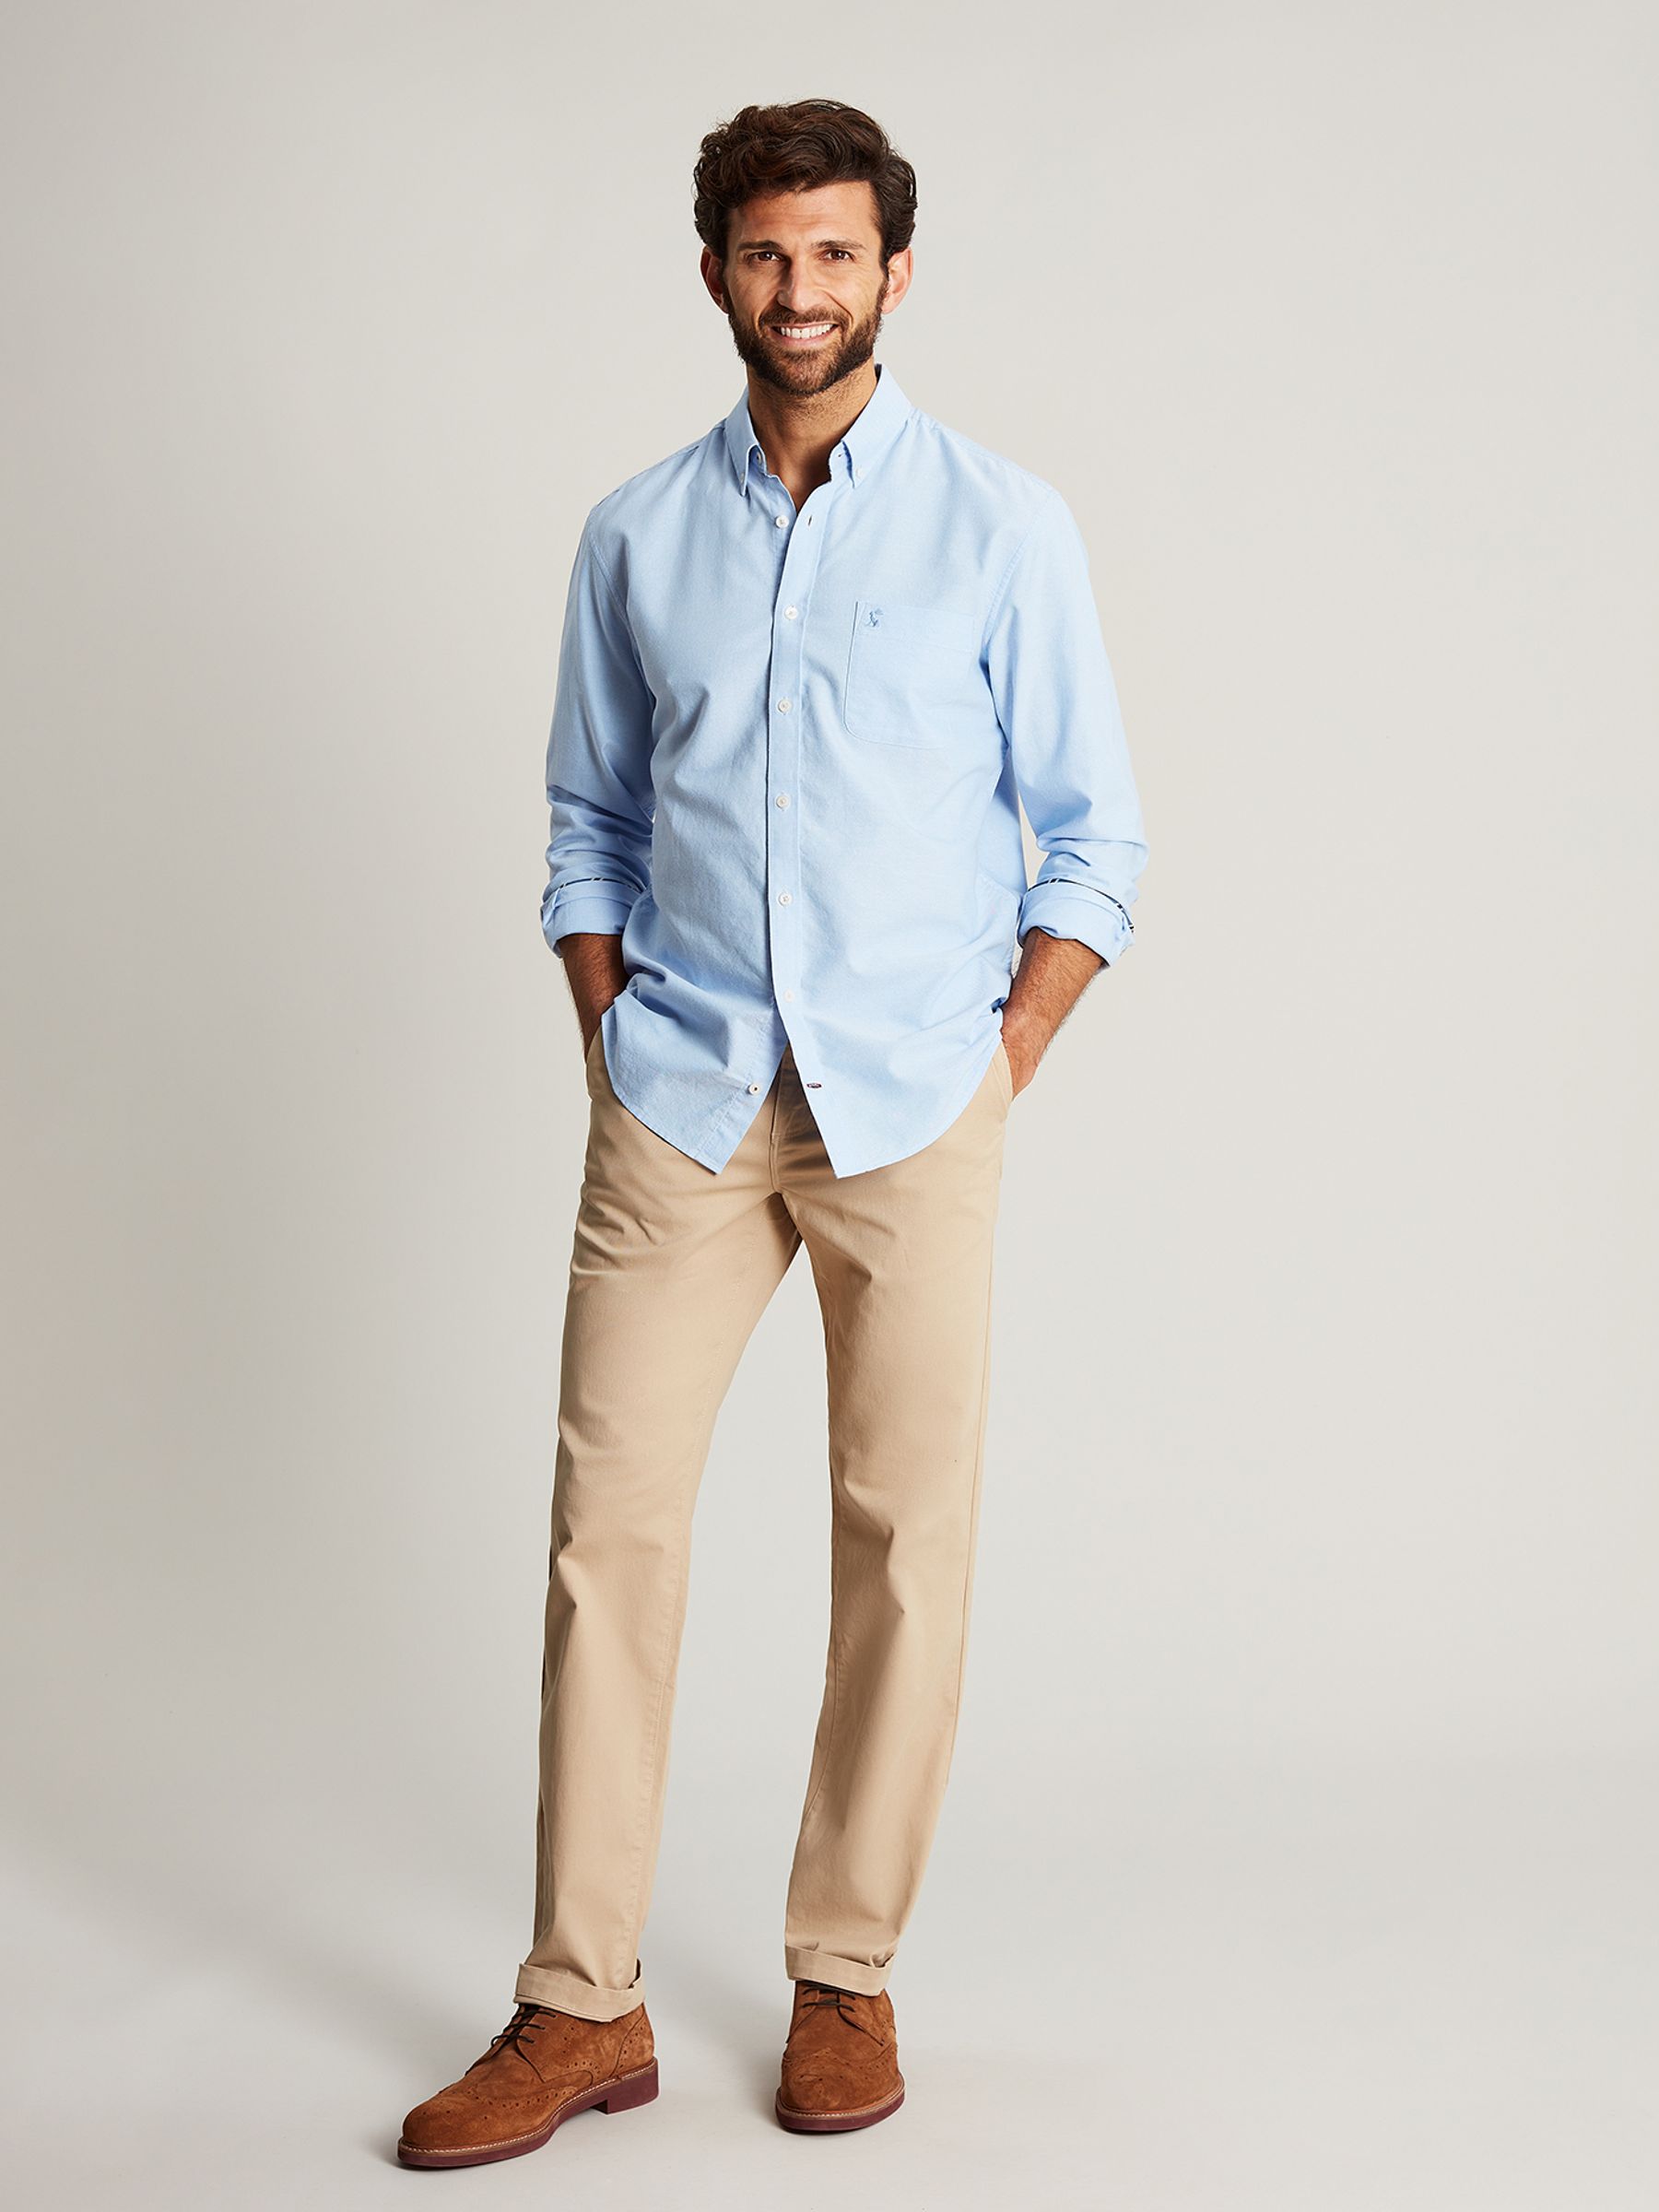 Buy Joules Stamford Slim Fit Chinos from the Joules online shop